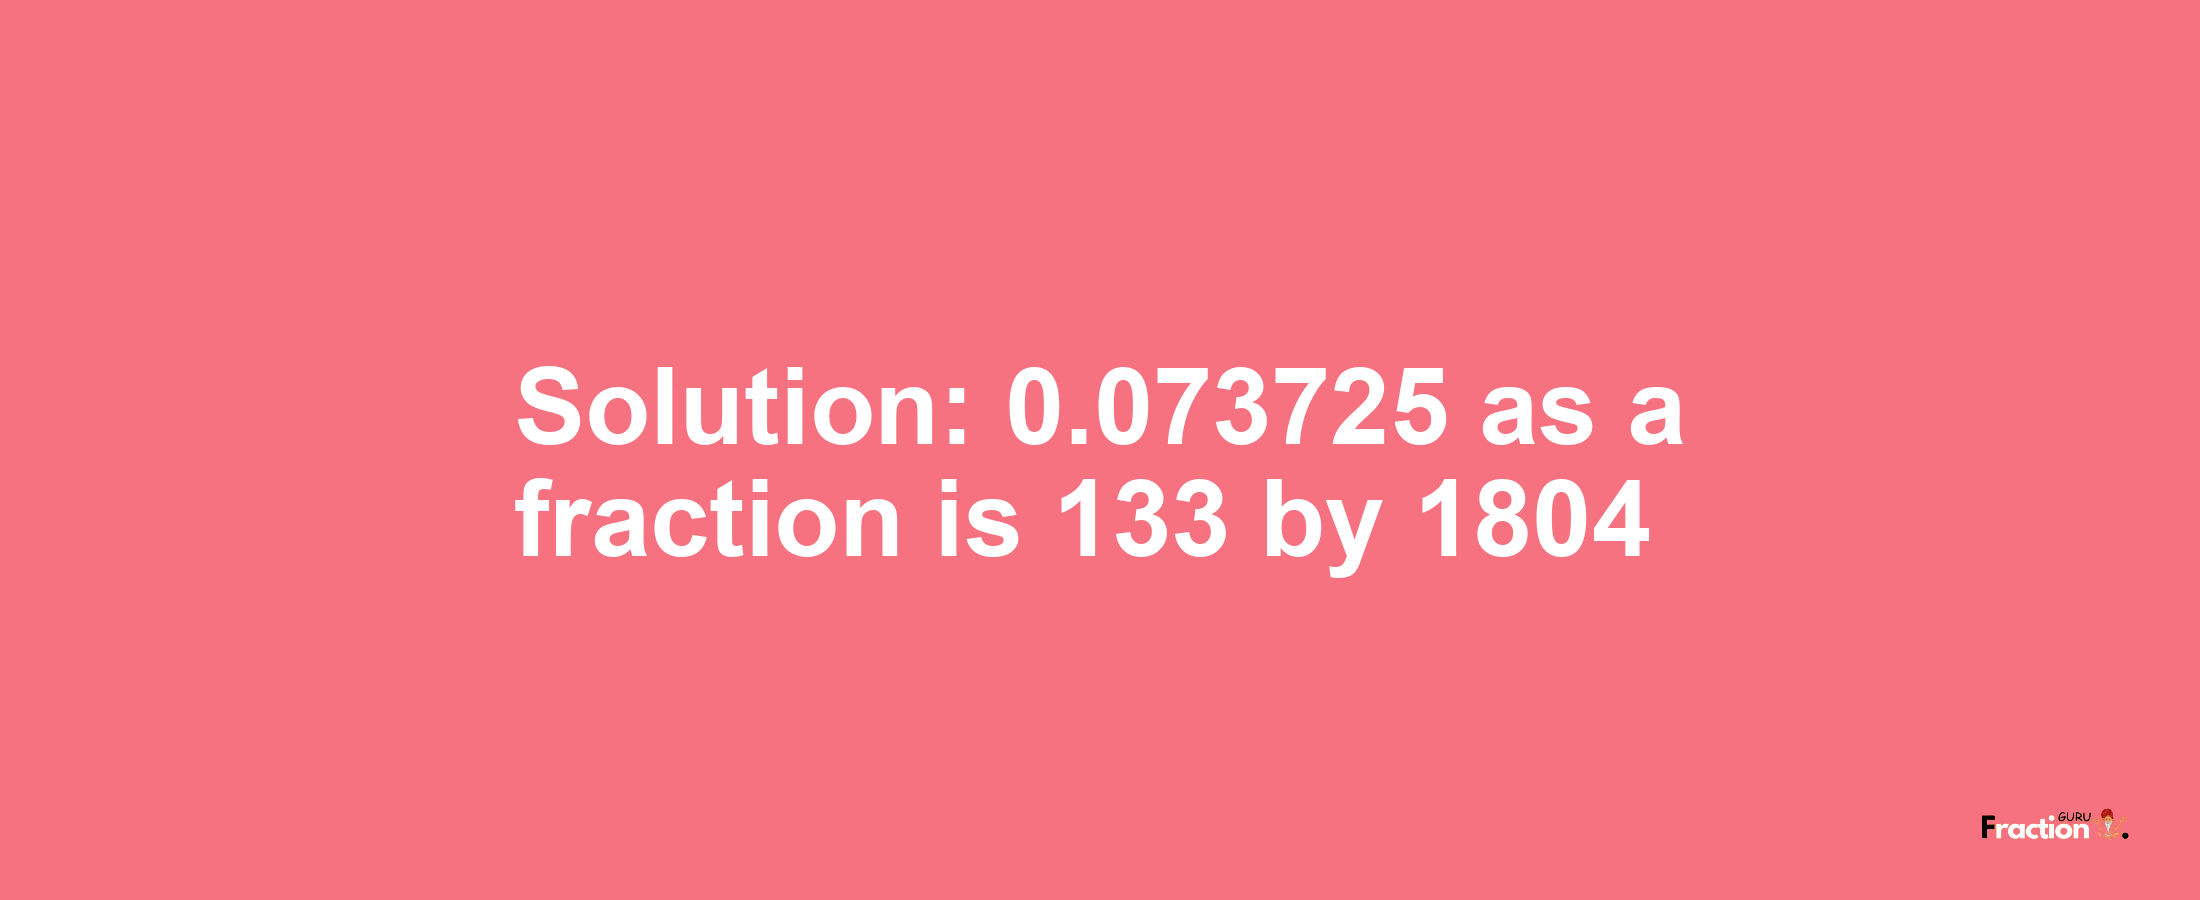 Solution:0.073725 as a fraction is 133/1804